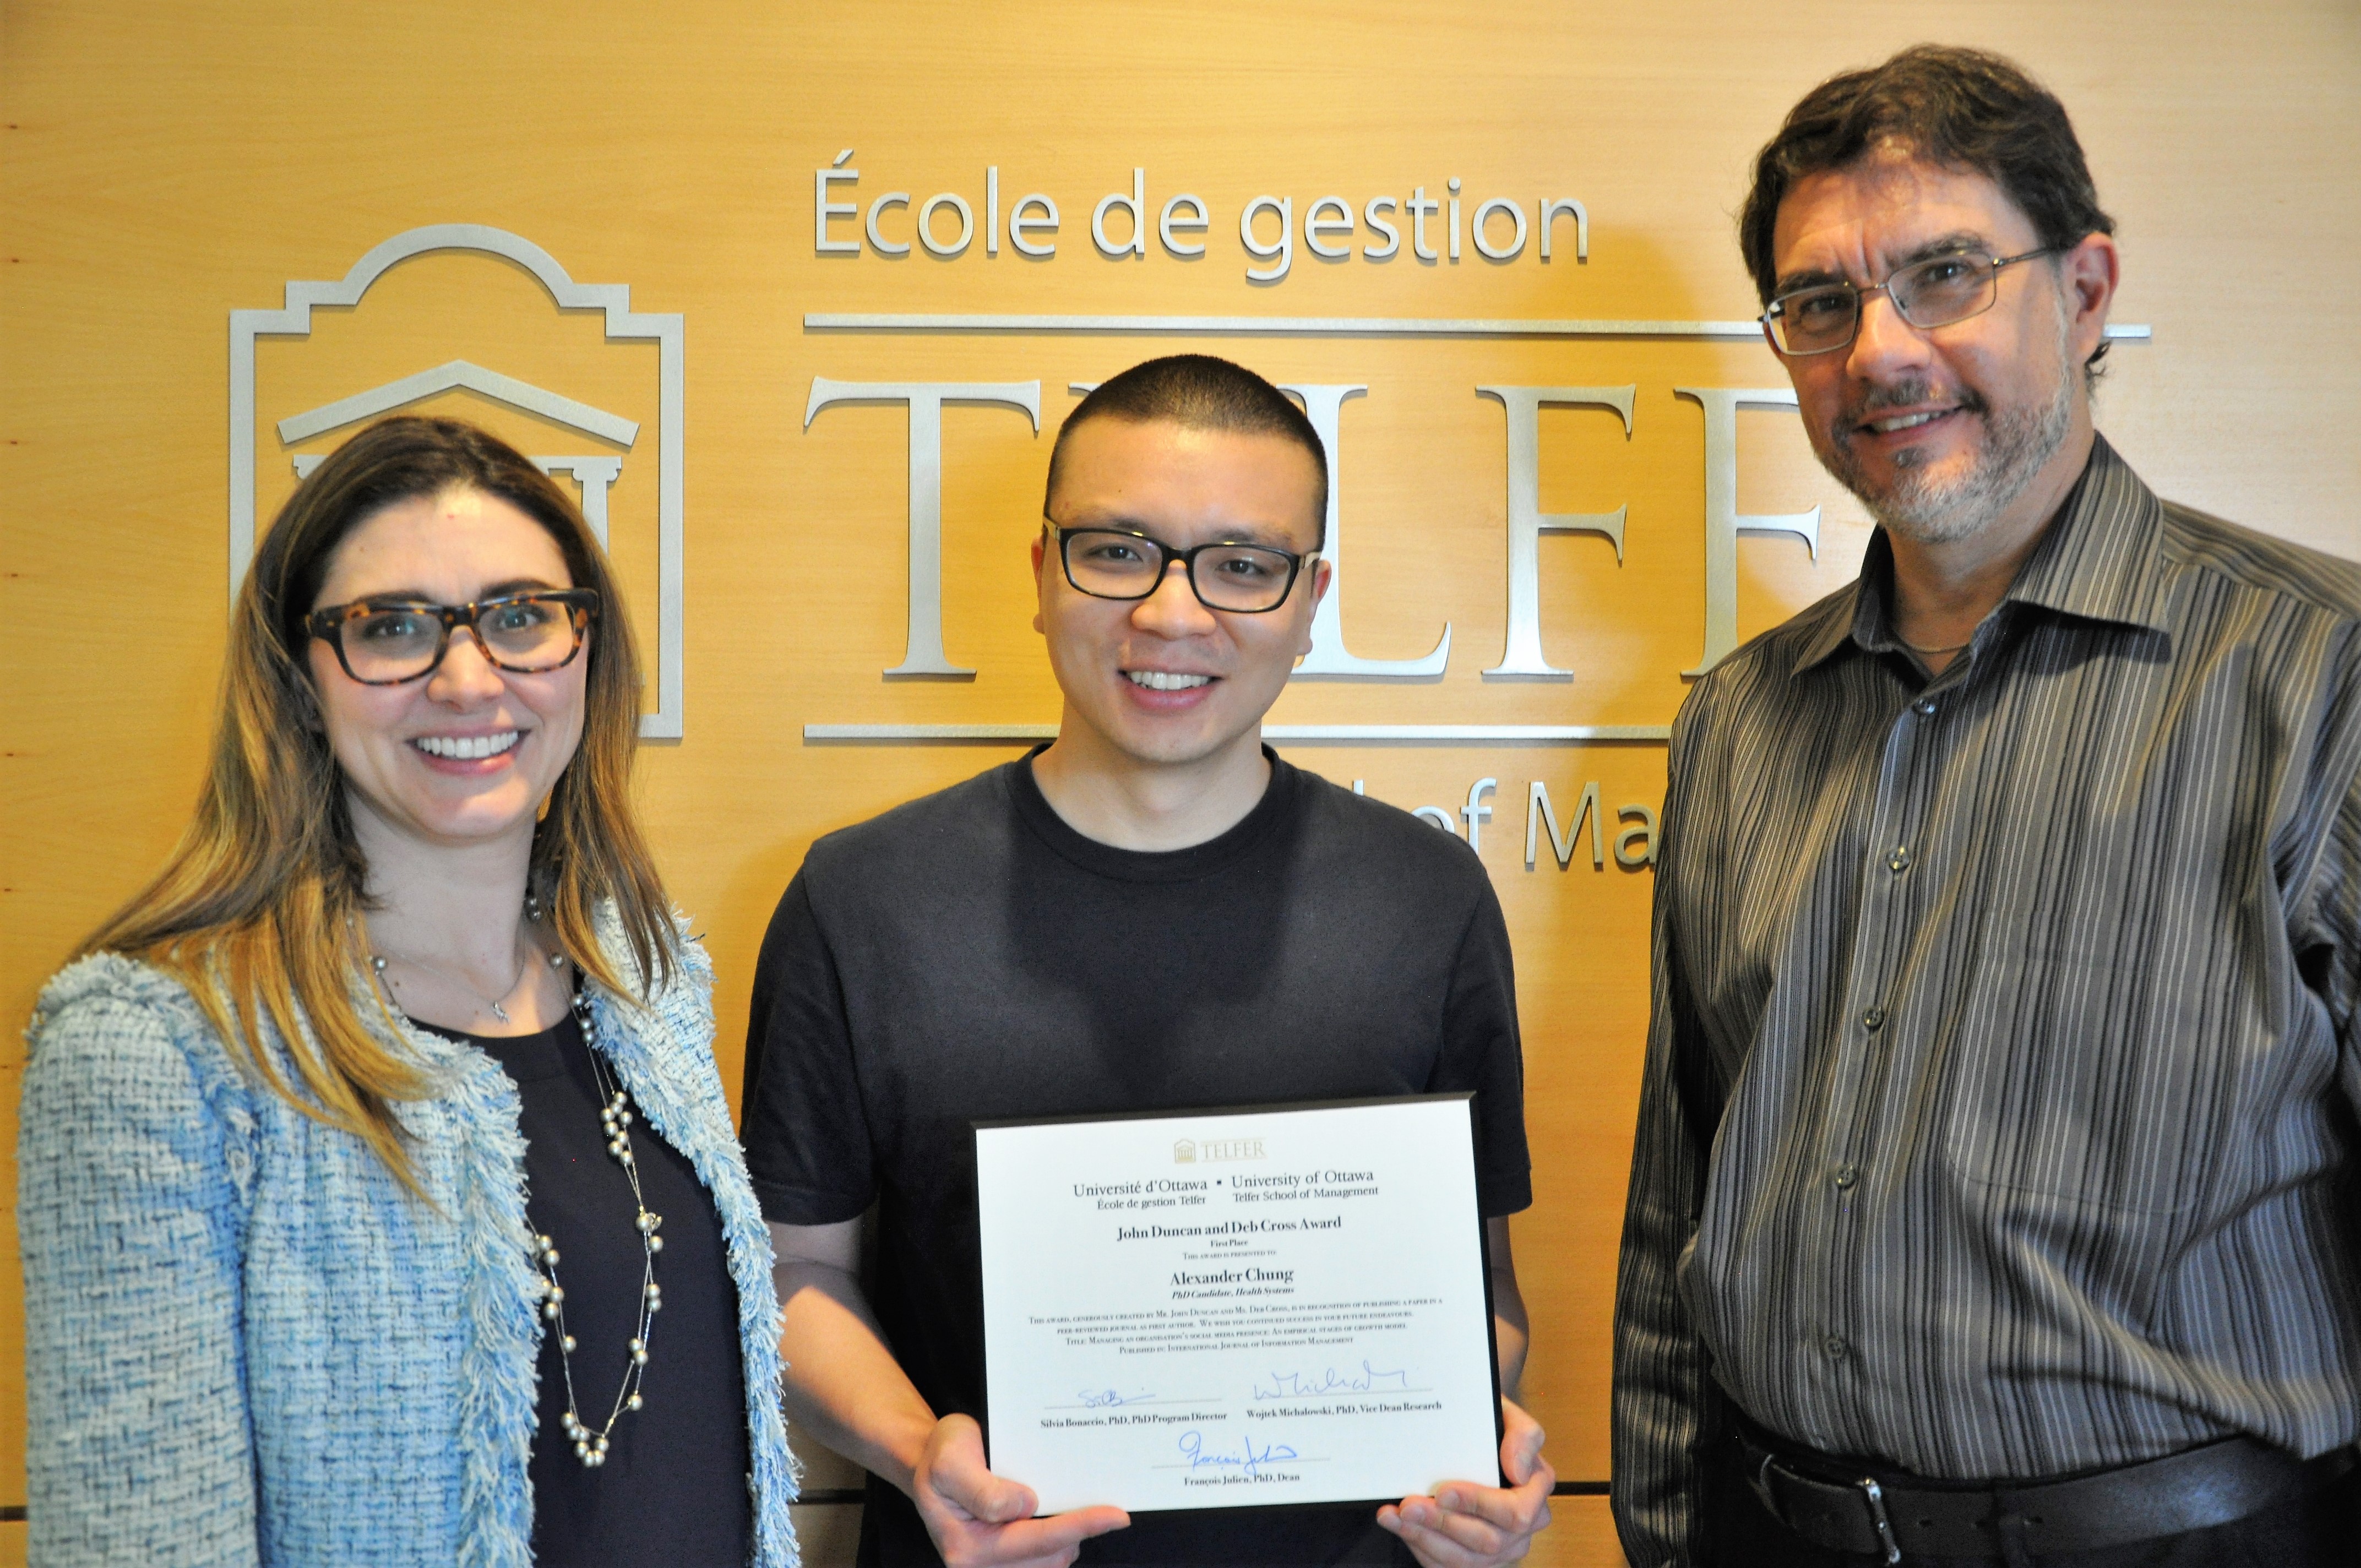 Alexander, PHD program director and the Dean of the Telfer School of Management